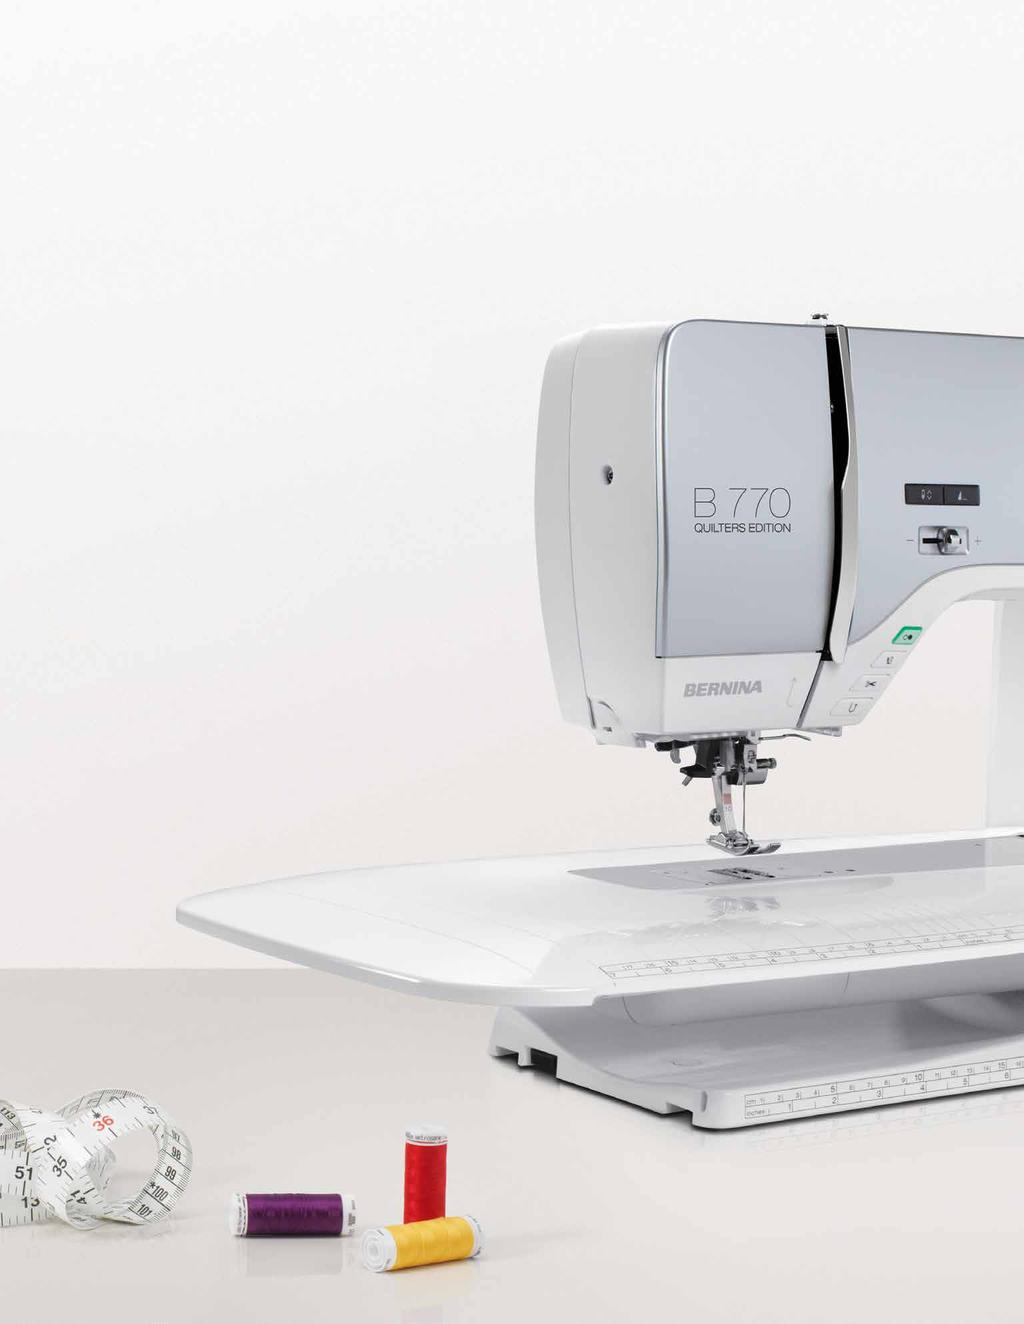 BERNINA Quality For decades, BERNINA has been passionately committed to the development of sewing and embroidery machines. Swiss precision is at the heart of our products.